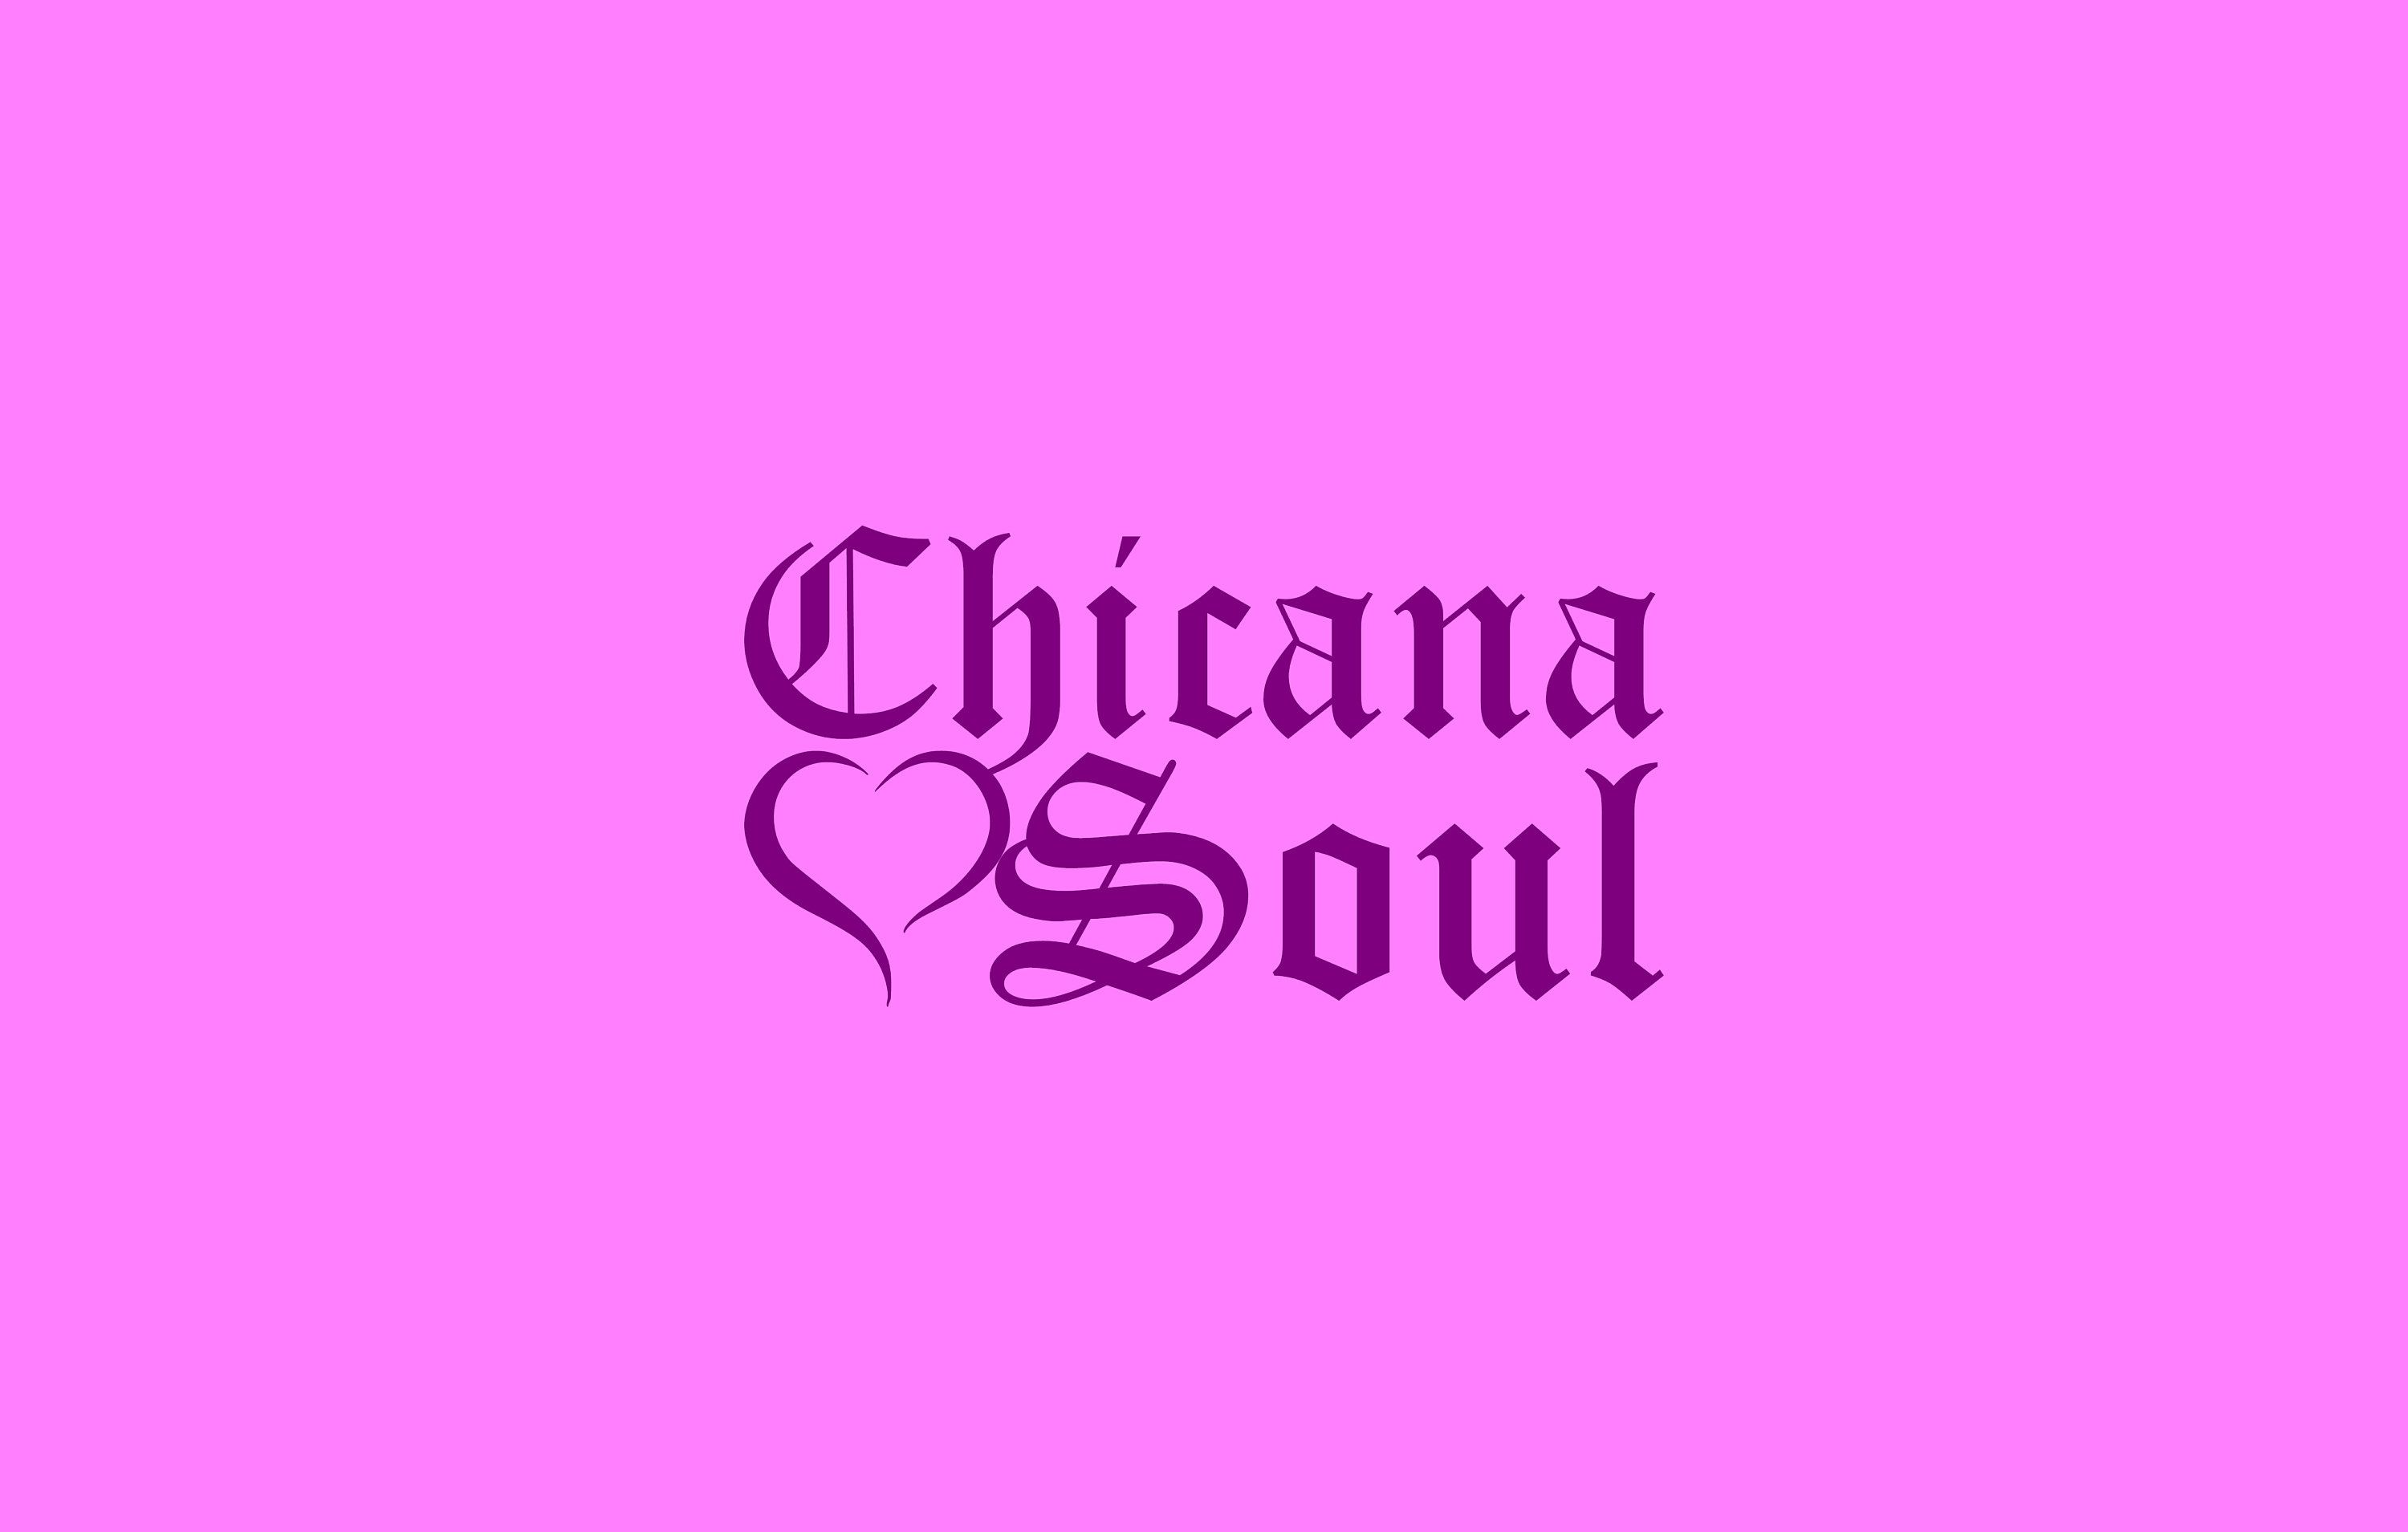 Chicana Soul With Heart. Gangsta quotes, Chicana, Spanglish quotes